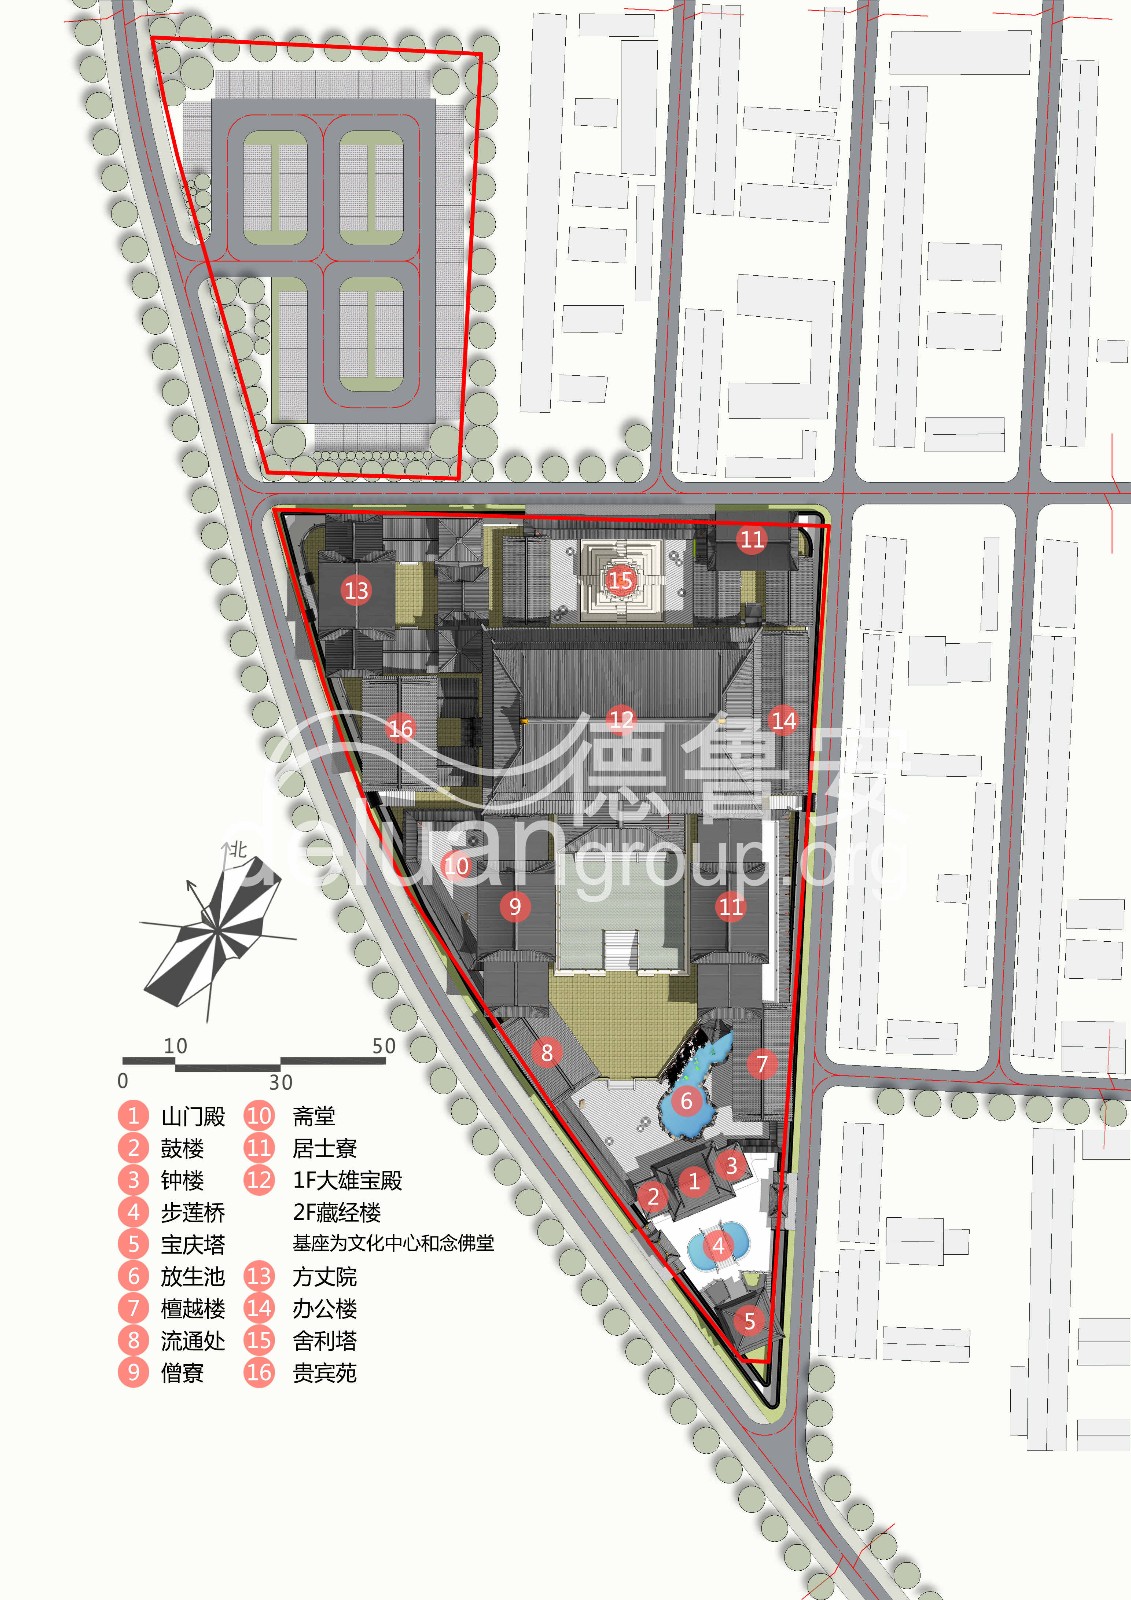 Planning and design of Baoqing temple in Xianghe0(图9)